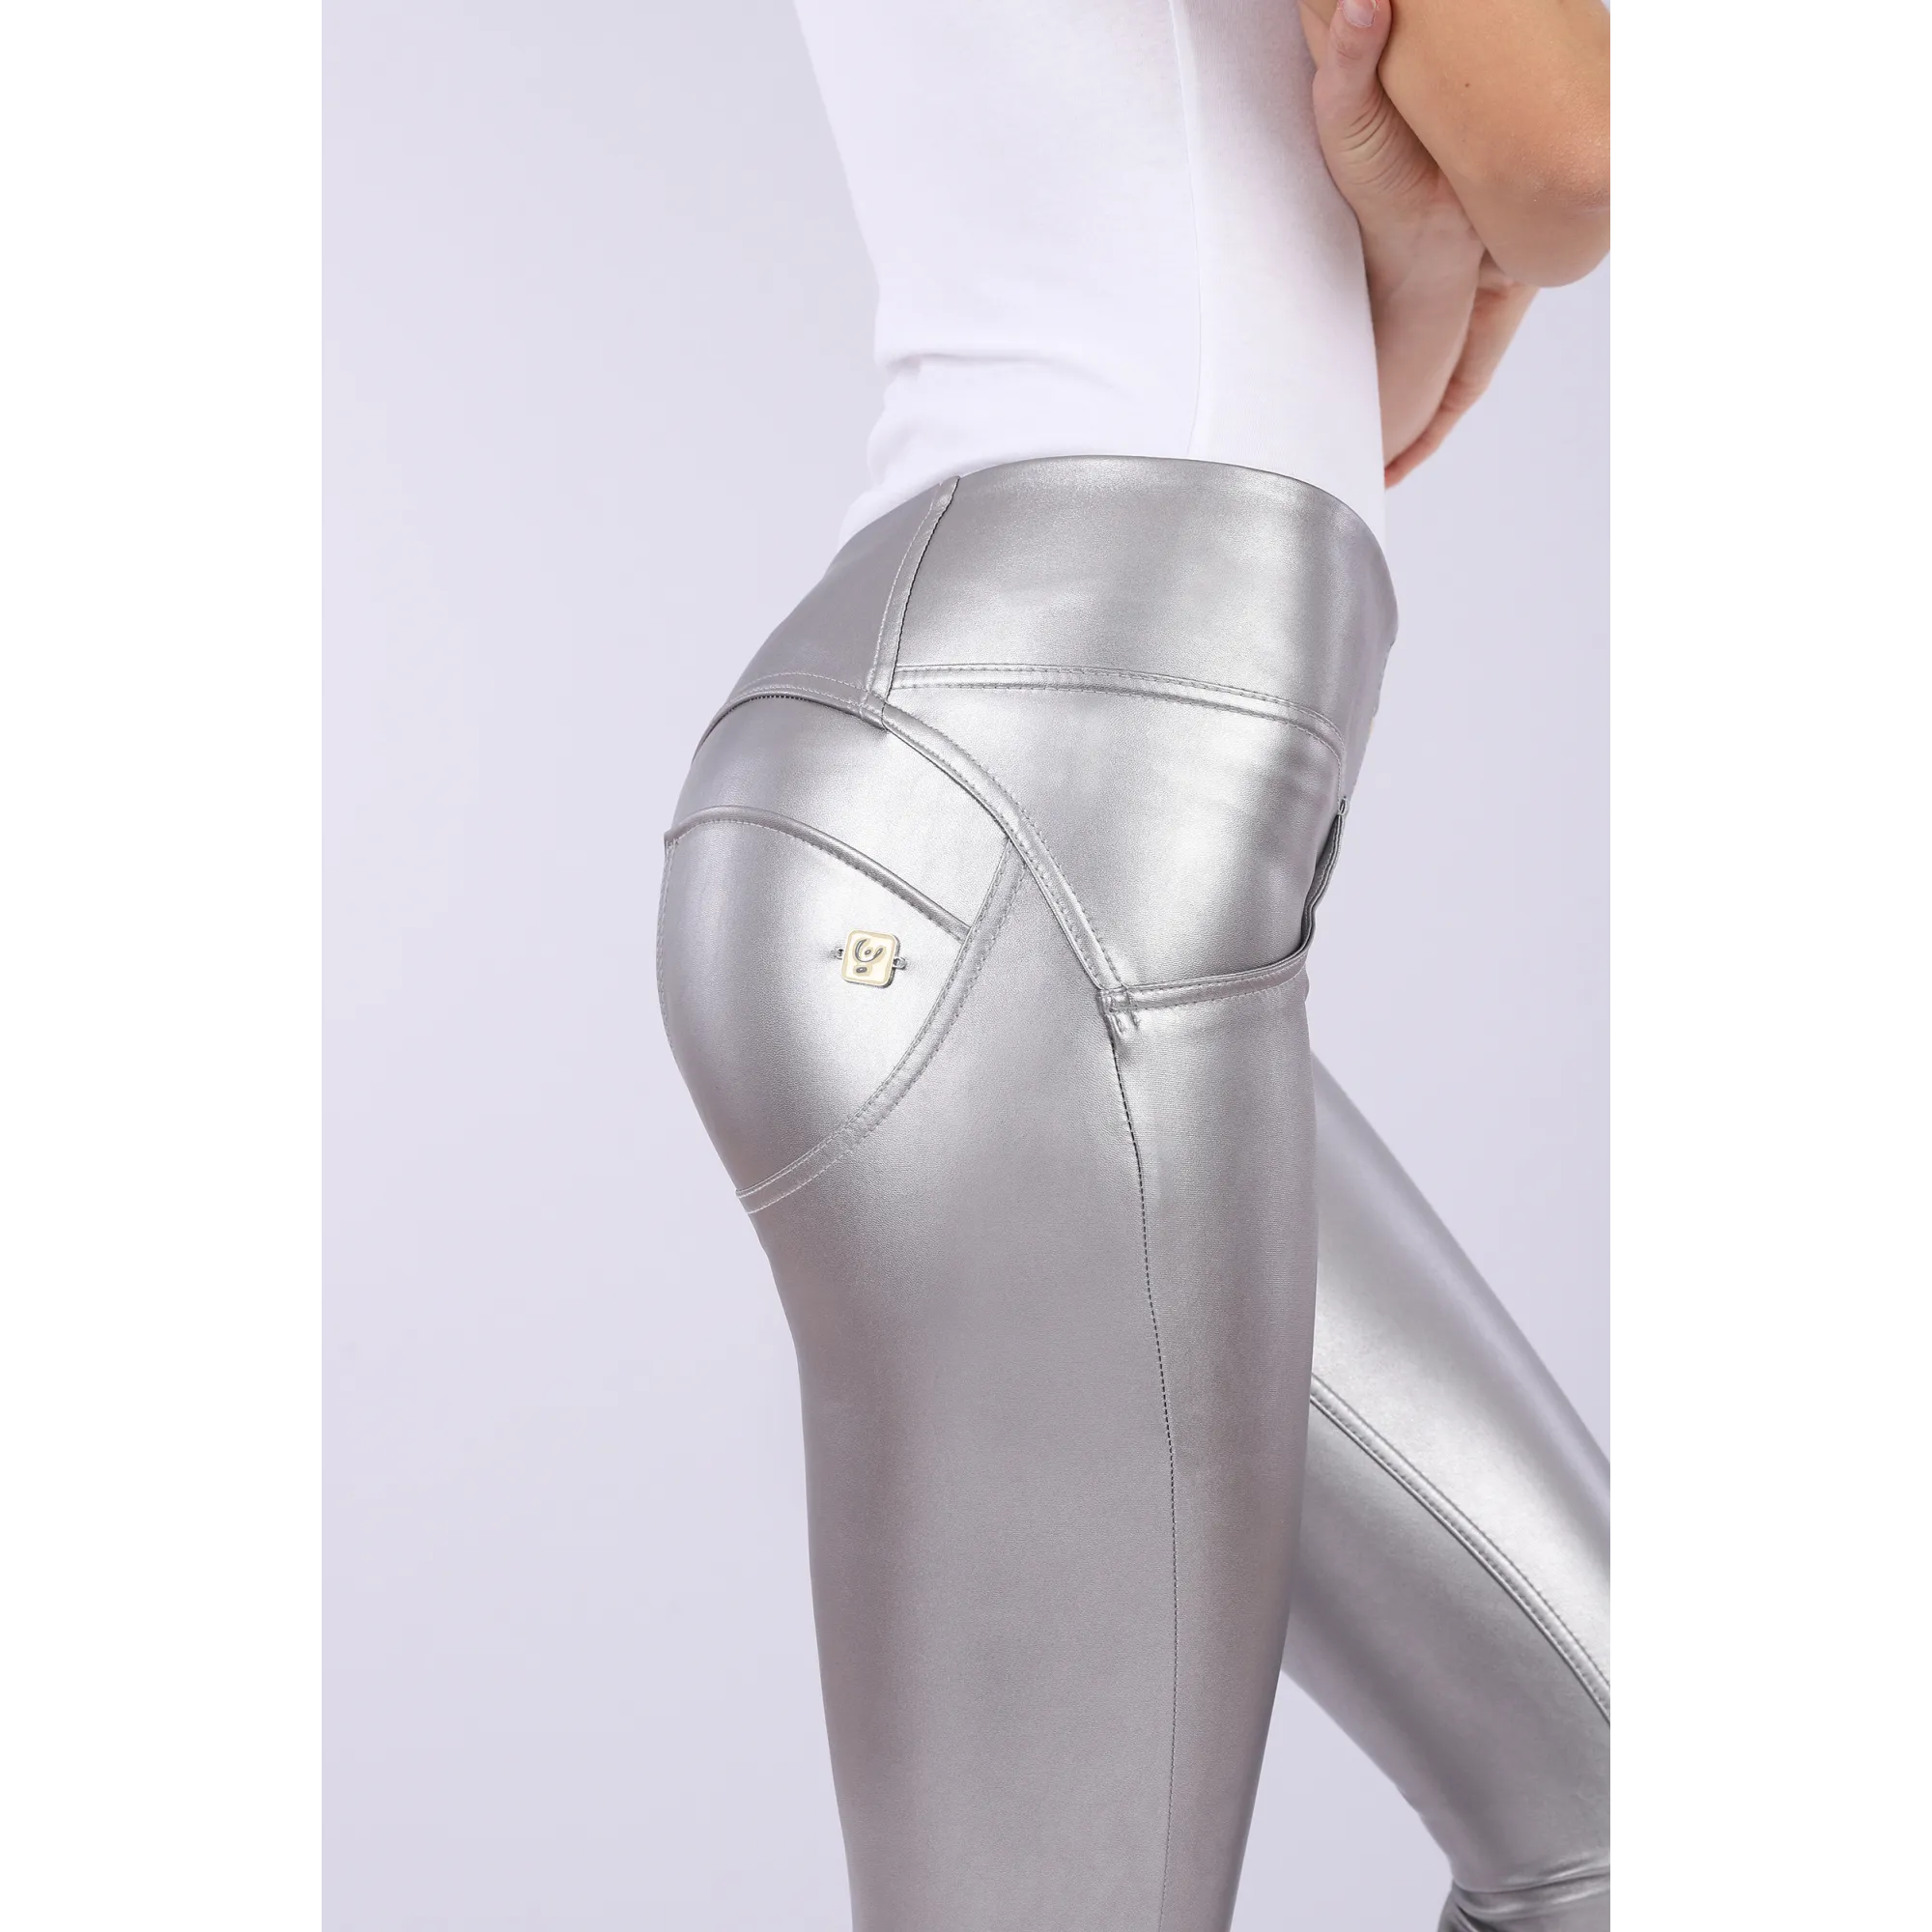 Freddy WR.UP® Vegan Leather - Mid Waist Skinny - Opaque Metallized - Silver - S22